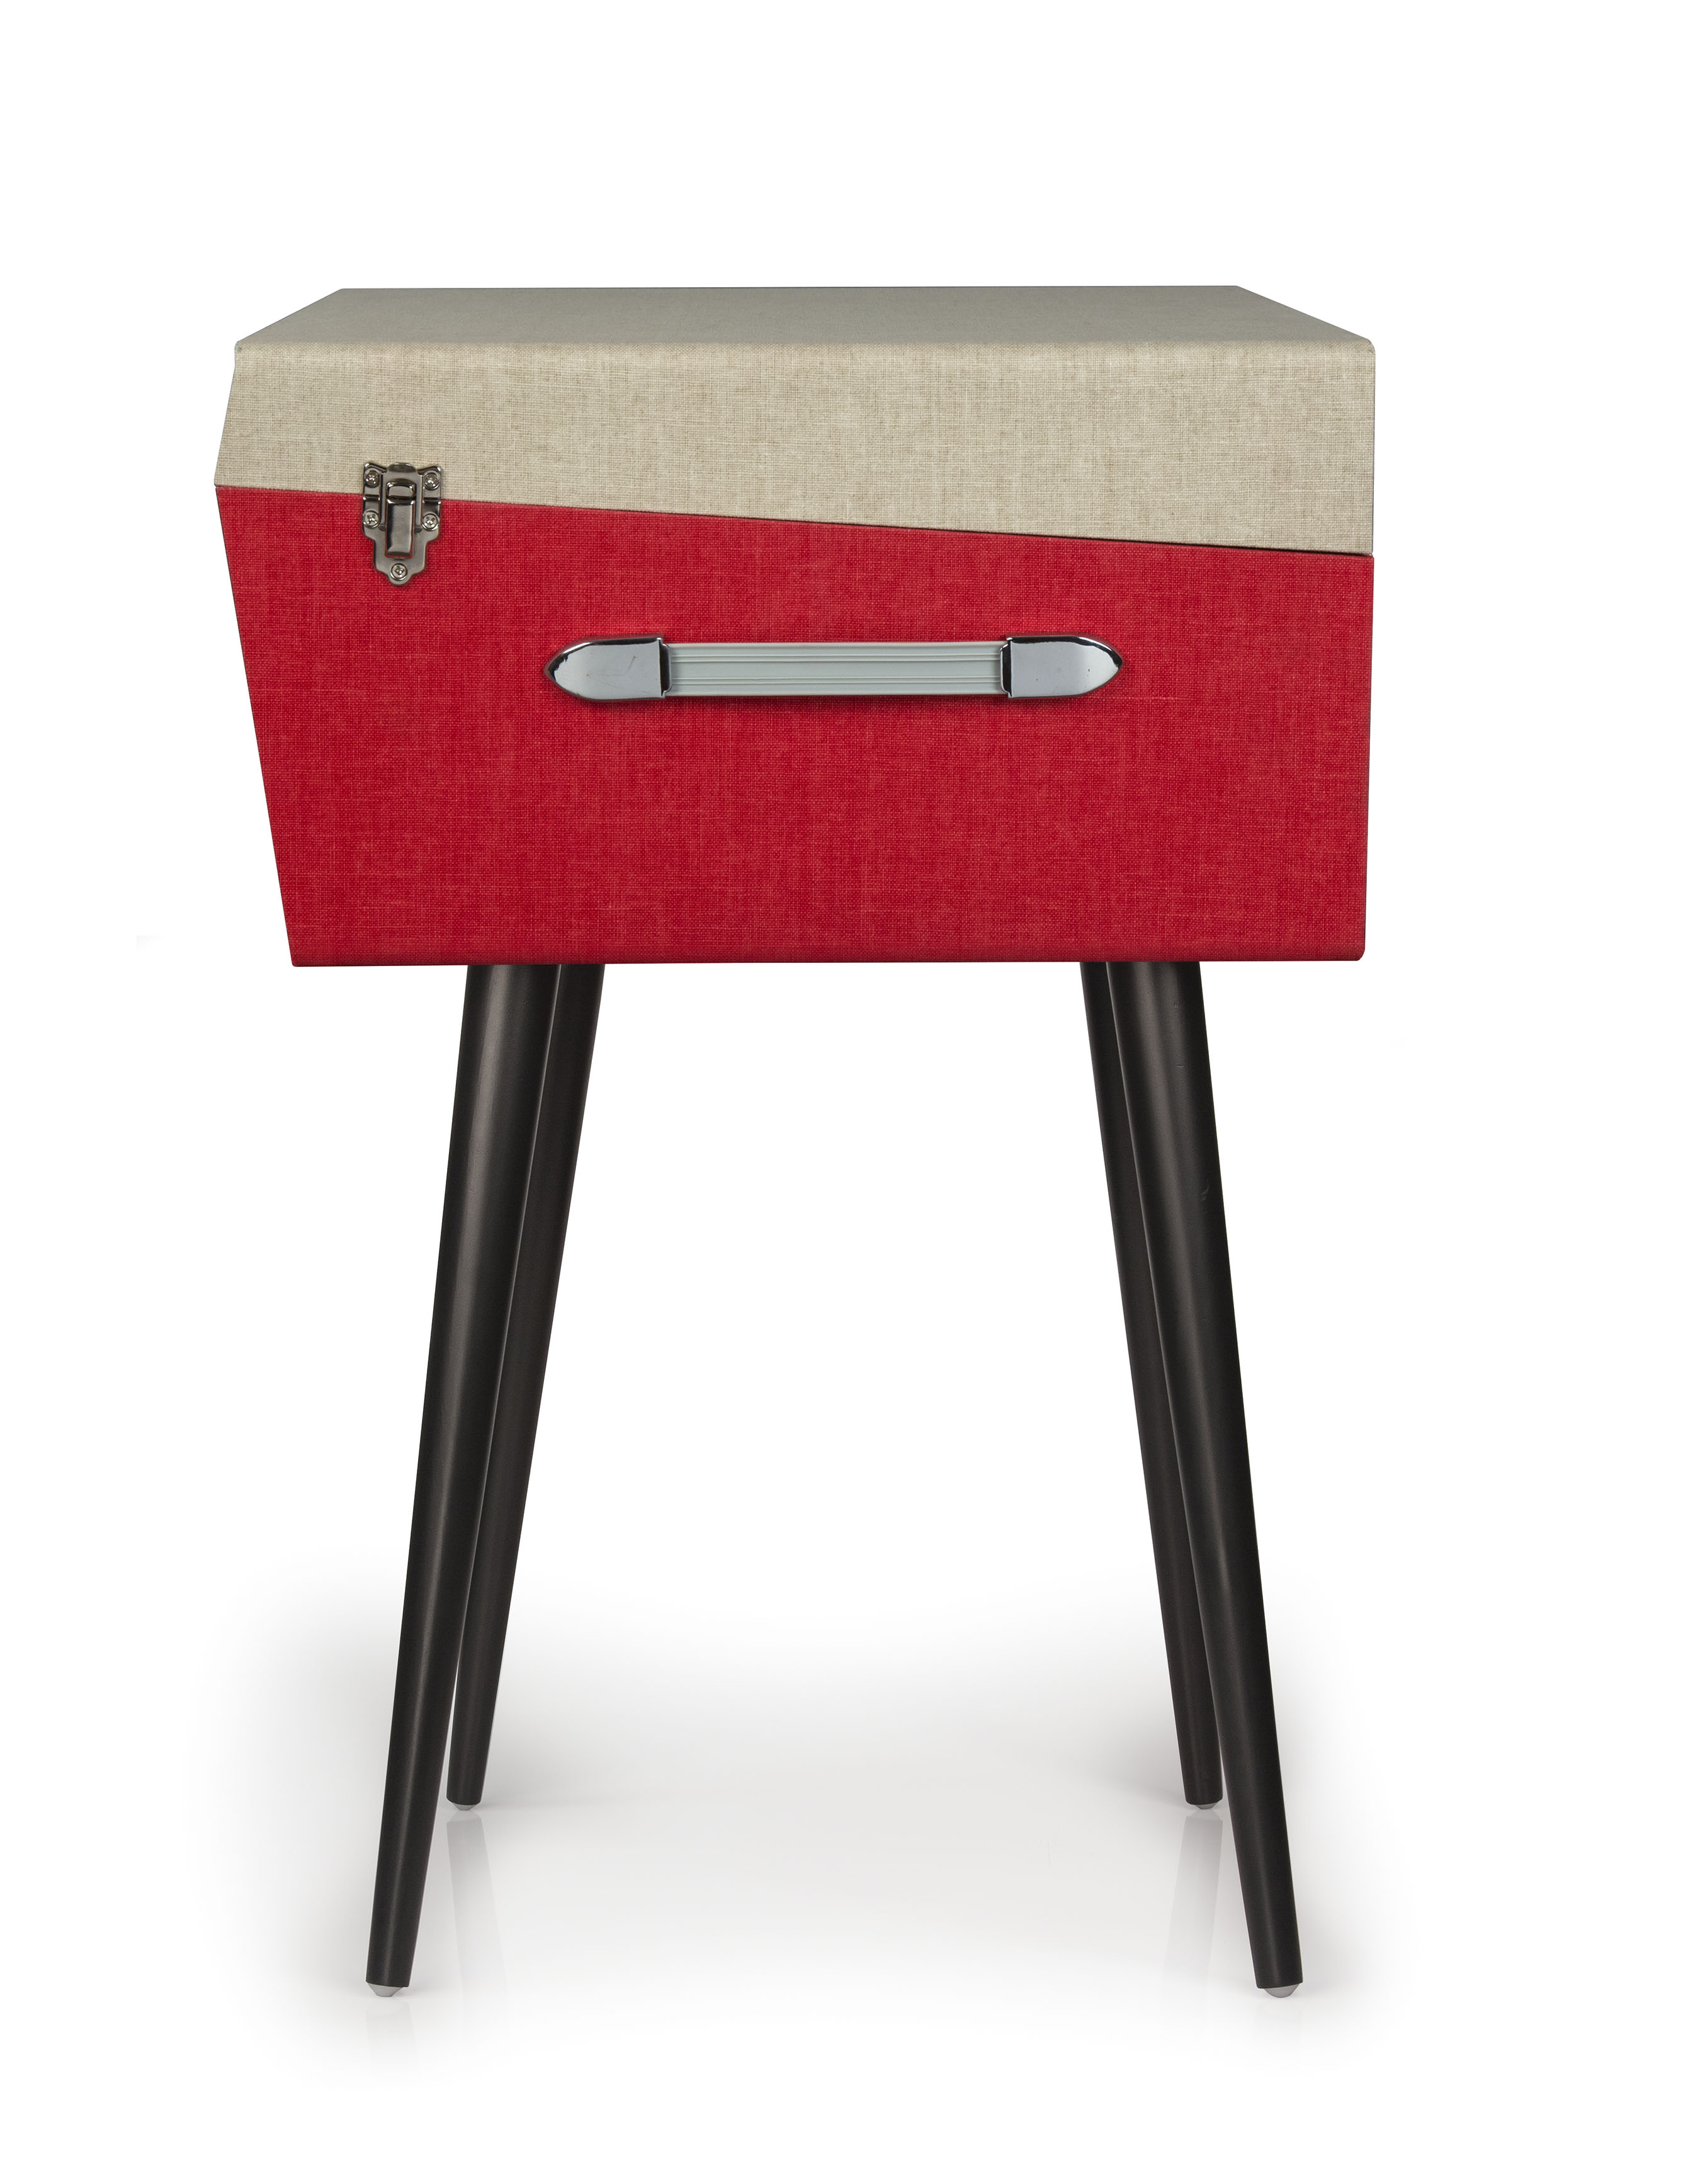 Crosley Dansette Bermuda Bluetooth Portable Suitcase Record Player with 2-speed Turntable - Red - CR6233D-RE - image 5 of 7